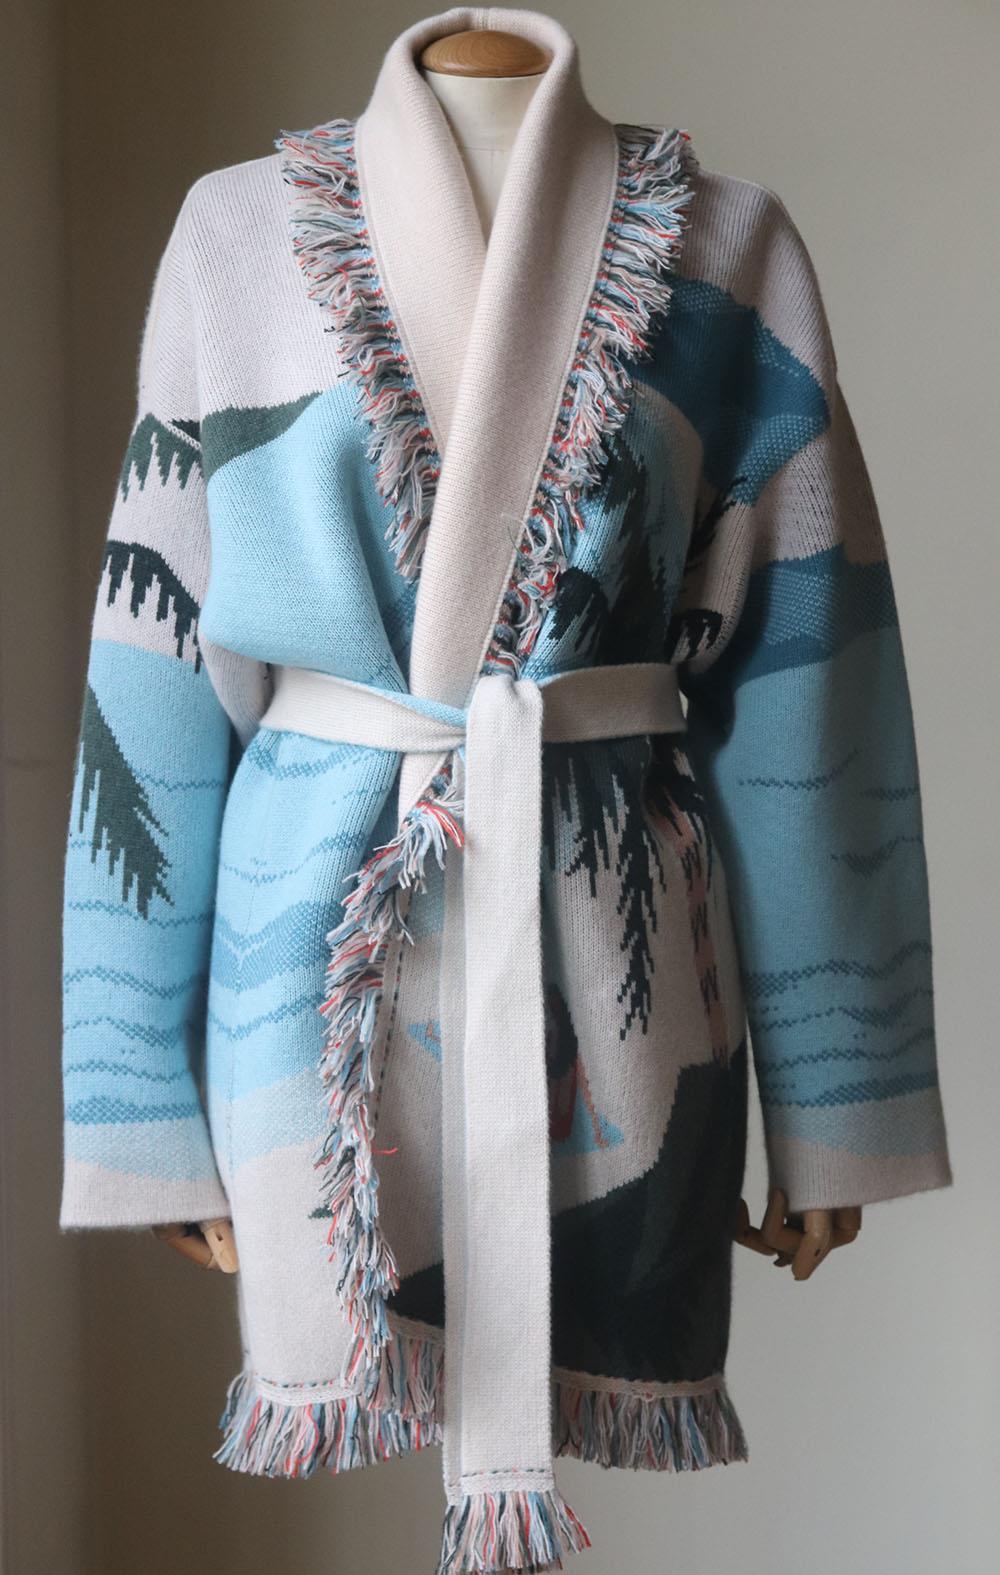 Alanui was founded after Nicolò Oddi discovered a vintage cardigan at the Rose Bowl flea market in Los Angeles, taking up to 15 hours to knit and assemble, this style is spun from Hawaii inspired beach jacquard-cashmere design. Multicoloured